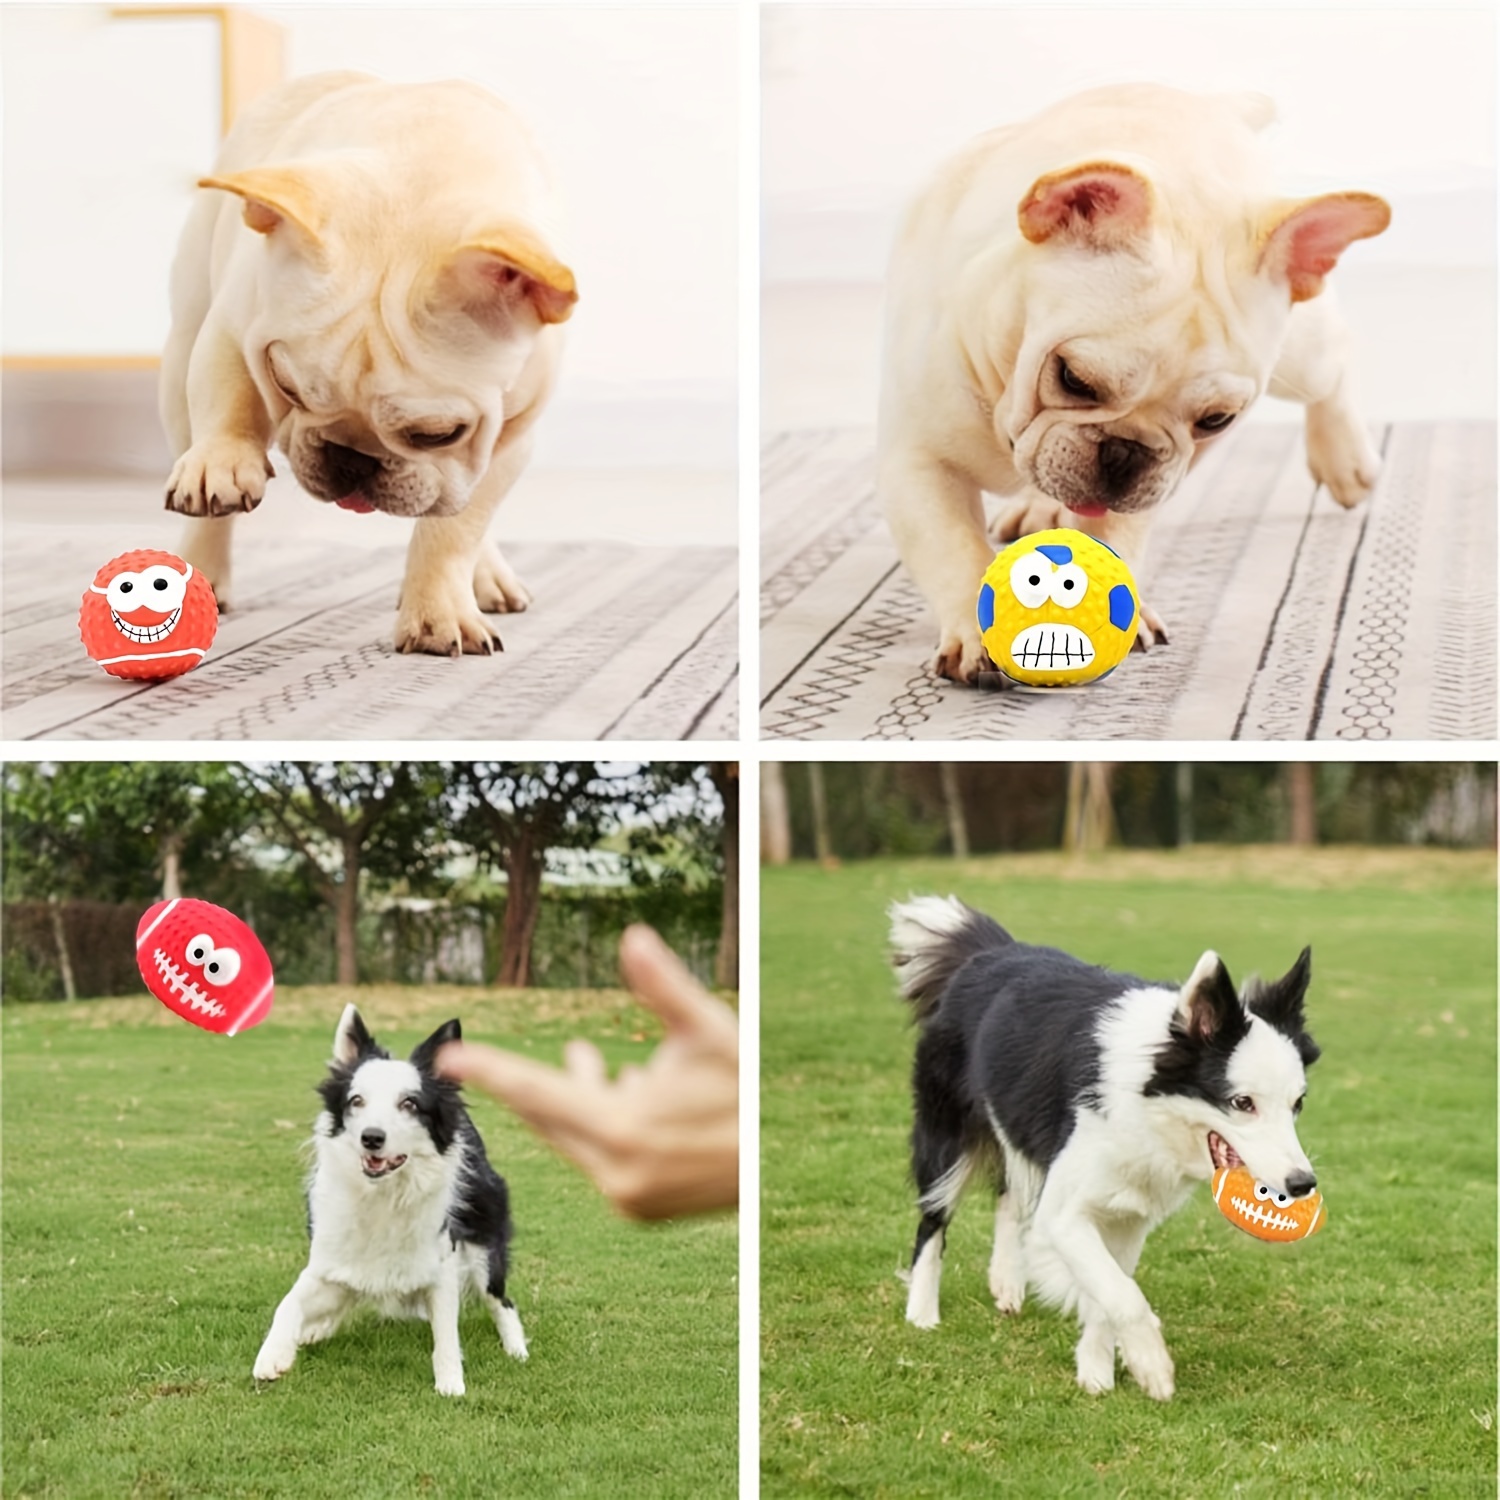 Dropship Children's Fun Dog Walking Artifact; Simulation Electric Toy;  Spotted Dog Can Go Forward And Reverse; Eyes Can Move And Call With Music;  Large Traction Dog Toy For Toddlers to Sell Online